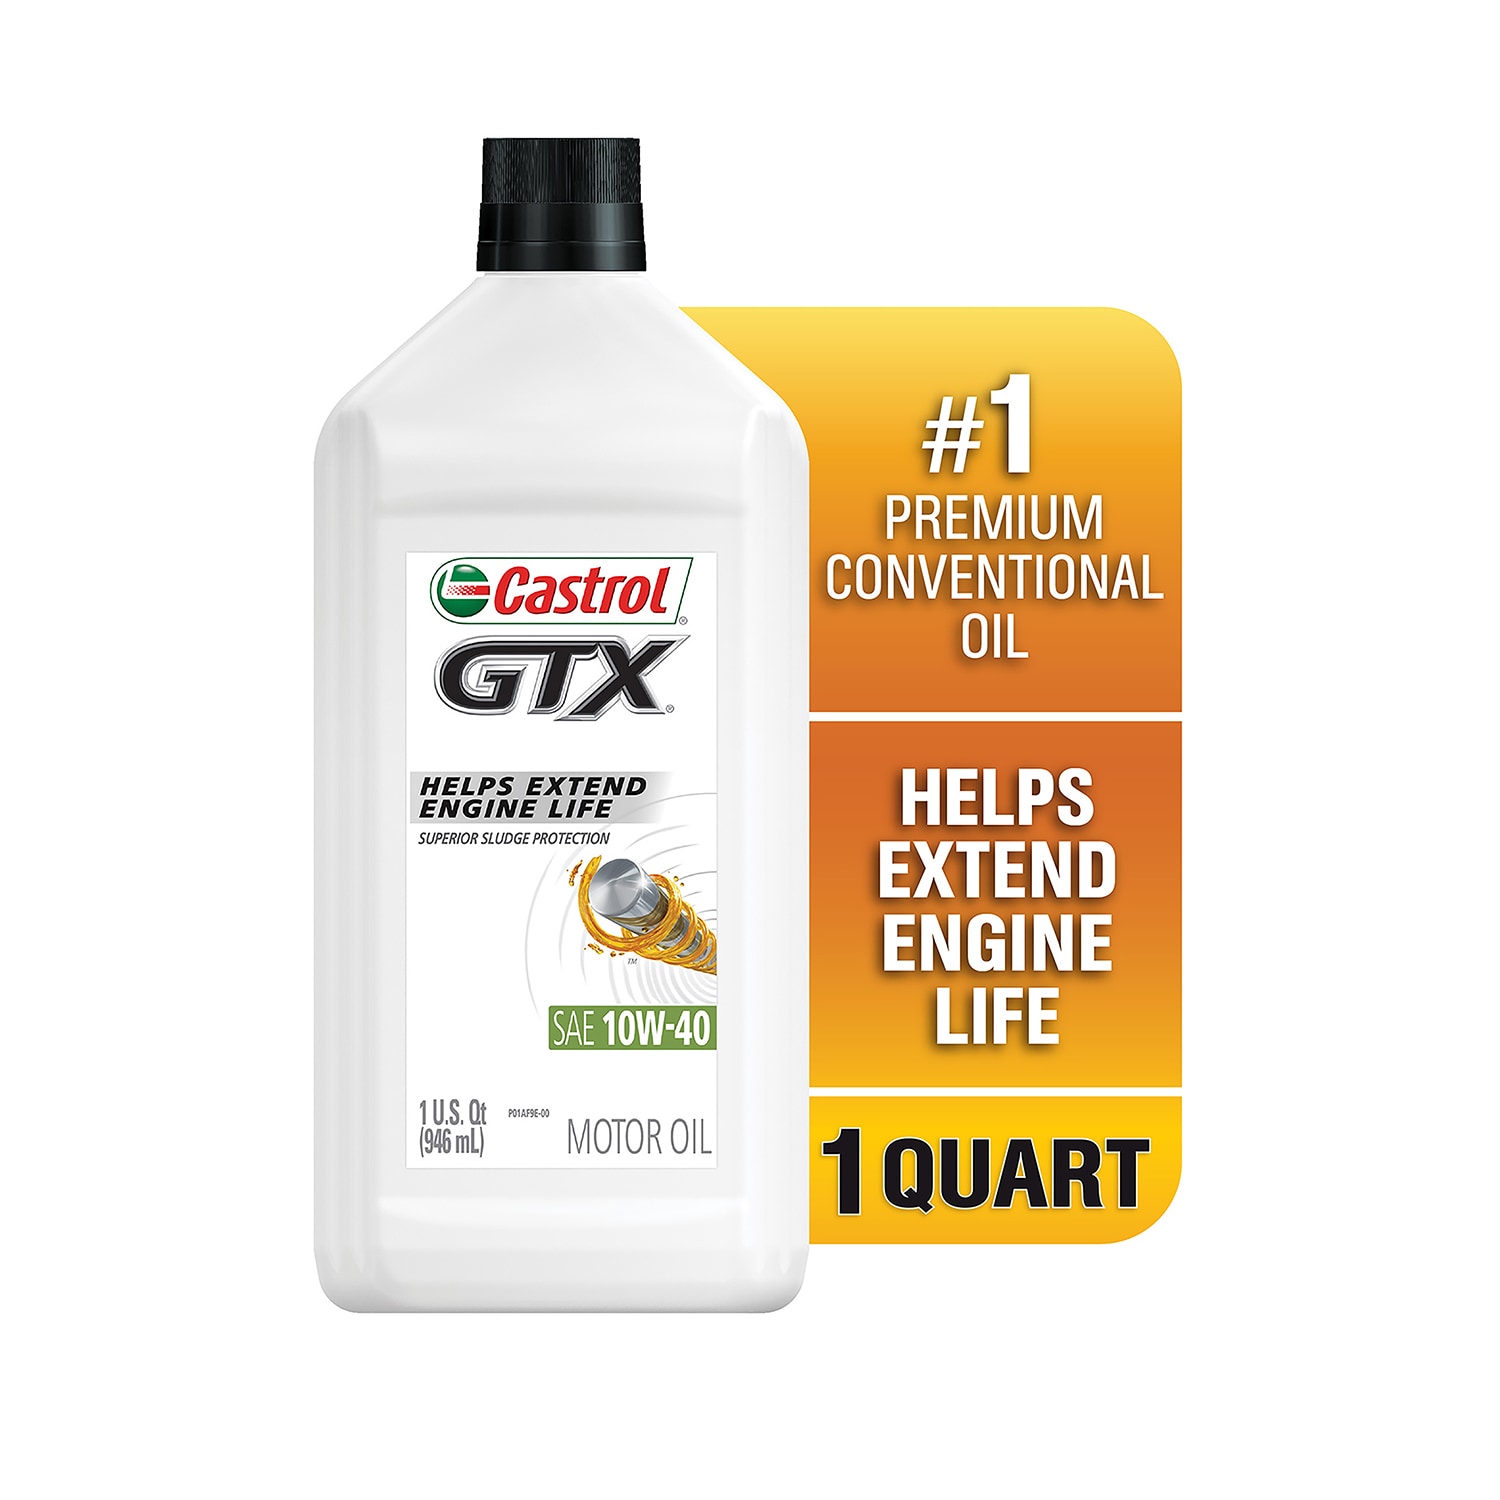 CASTROL 1 Quart 10W-40 Motor Oil for Superior Engine Protection and  Extended Engine Life in the Motor Oil & Additives department at